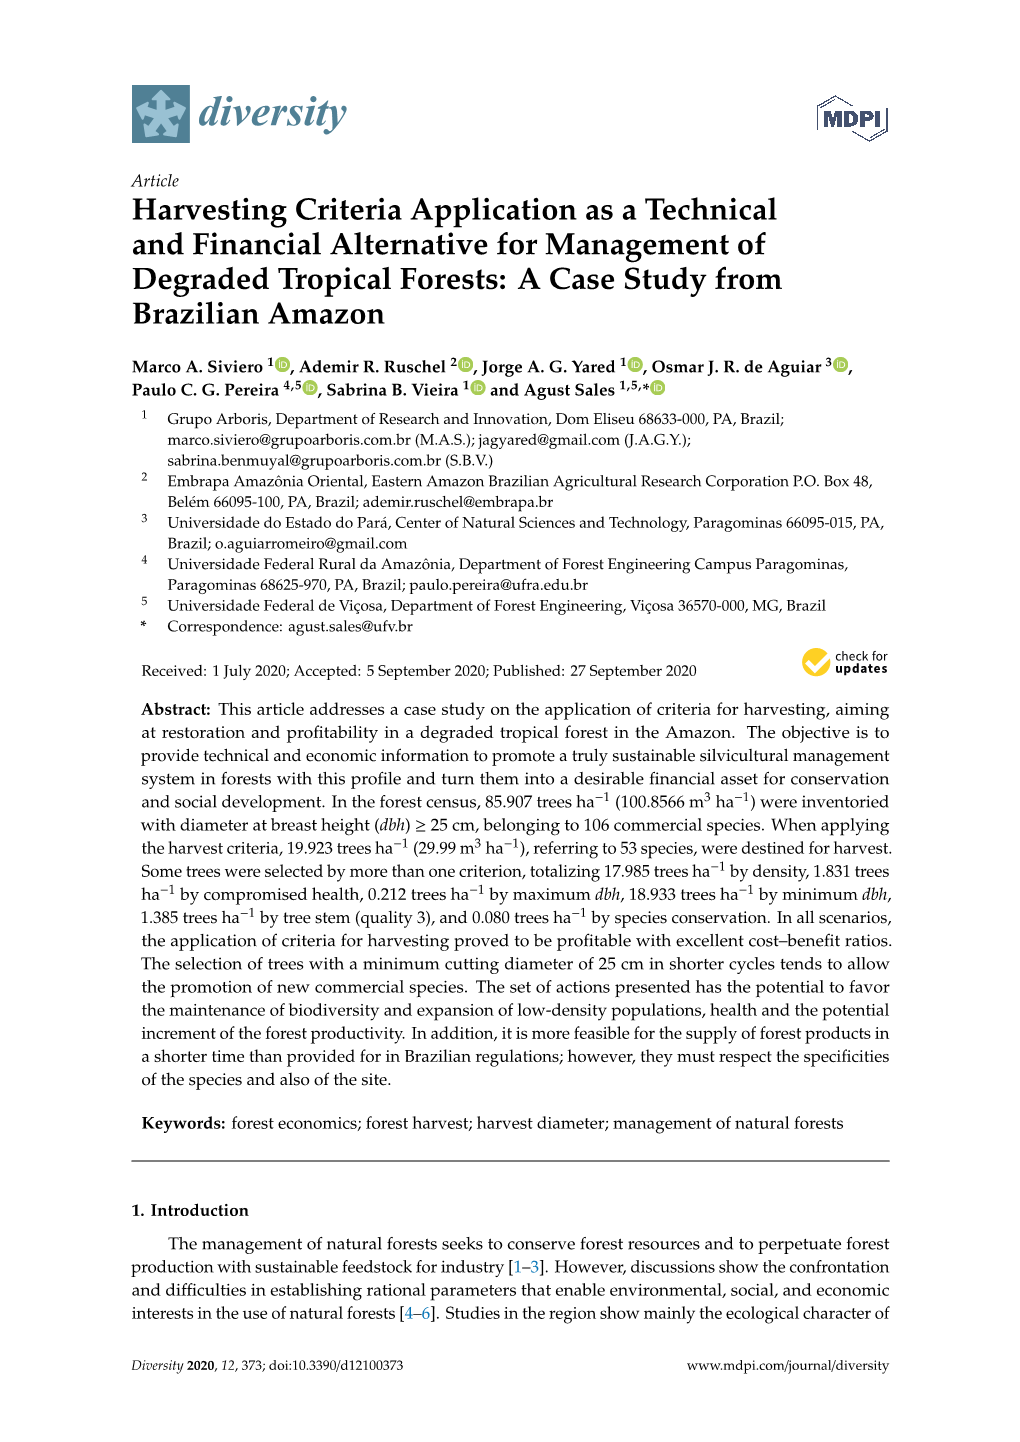 Harvesting Criteria Application As a Technical and Financial Alternative for Management of Degraded Tropical Forests: a Case Study from Brazilian Amazon